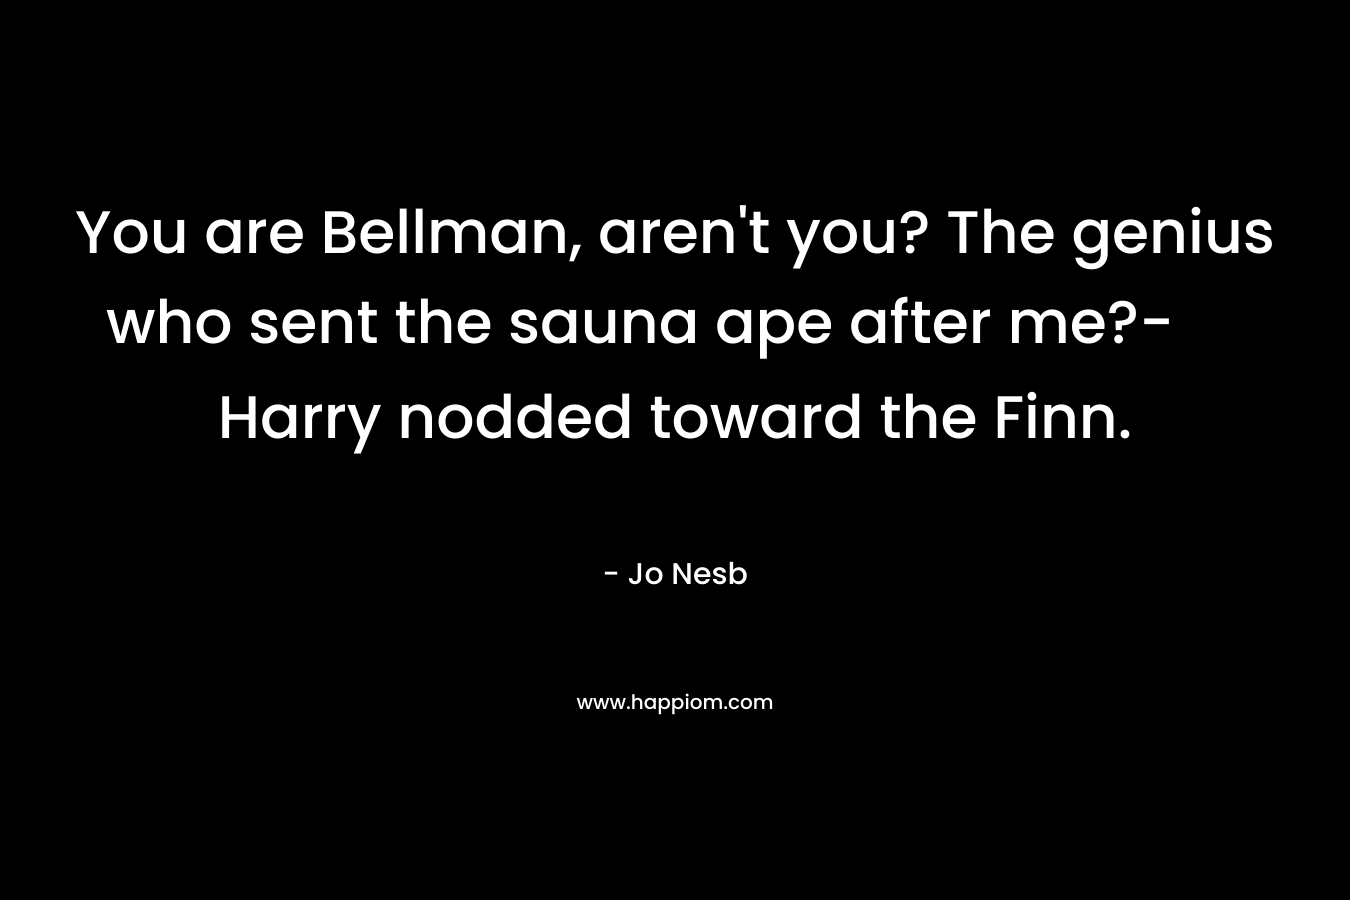 You are Bellman, aren’t you? The genius who sent the sauna ape after me?- Harry nodded toward the Finn. – Jo Nesb